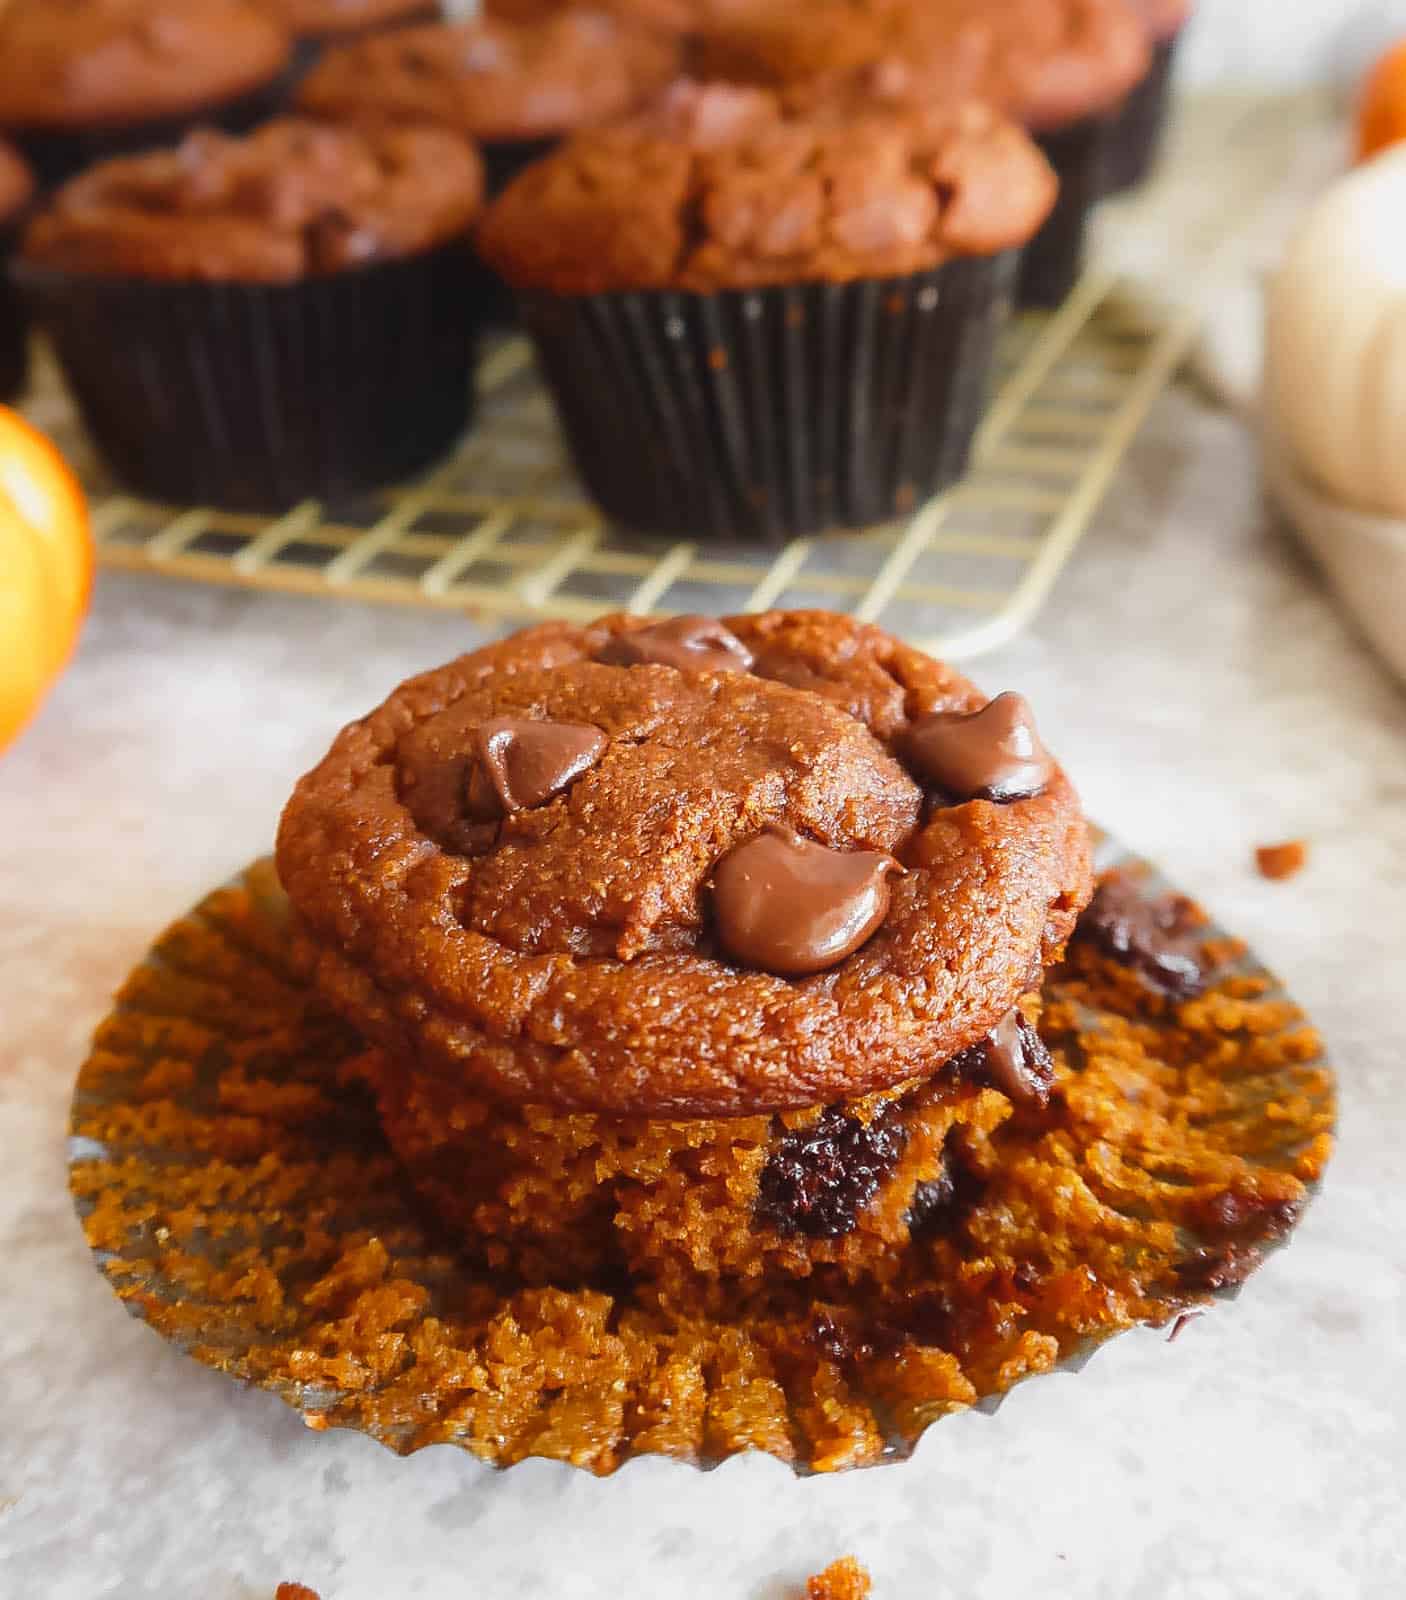 Paleo pumpkin muffins with melted chocolate chips on top.